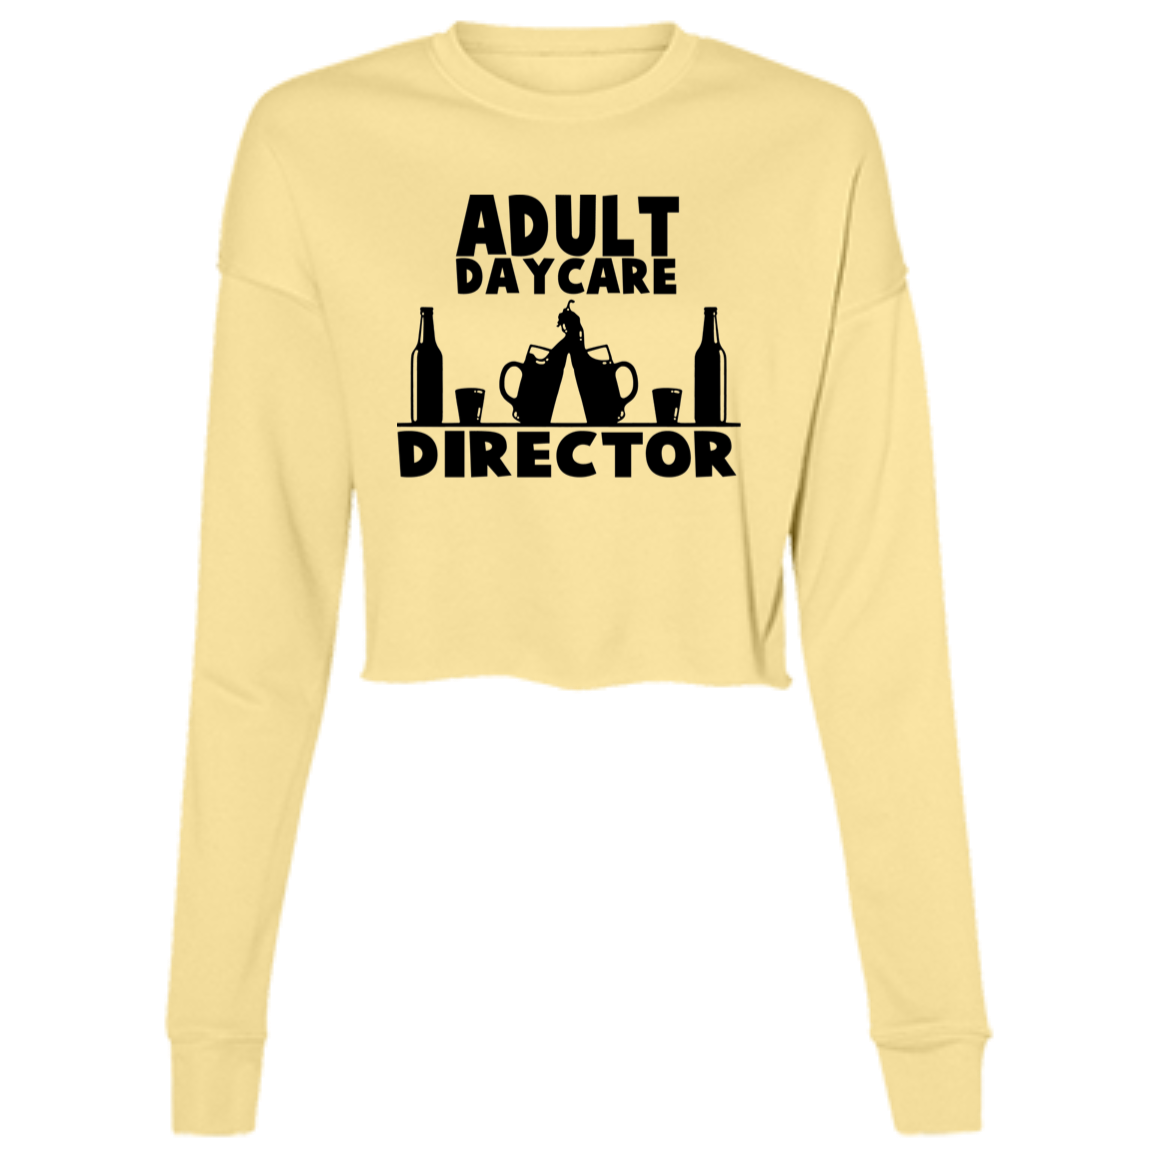 Adult Day Care B7503 Ladies' Cropped Fleece Crew